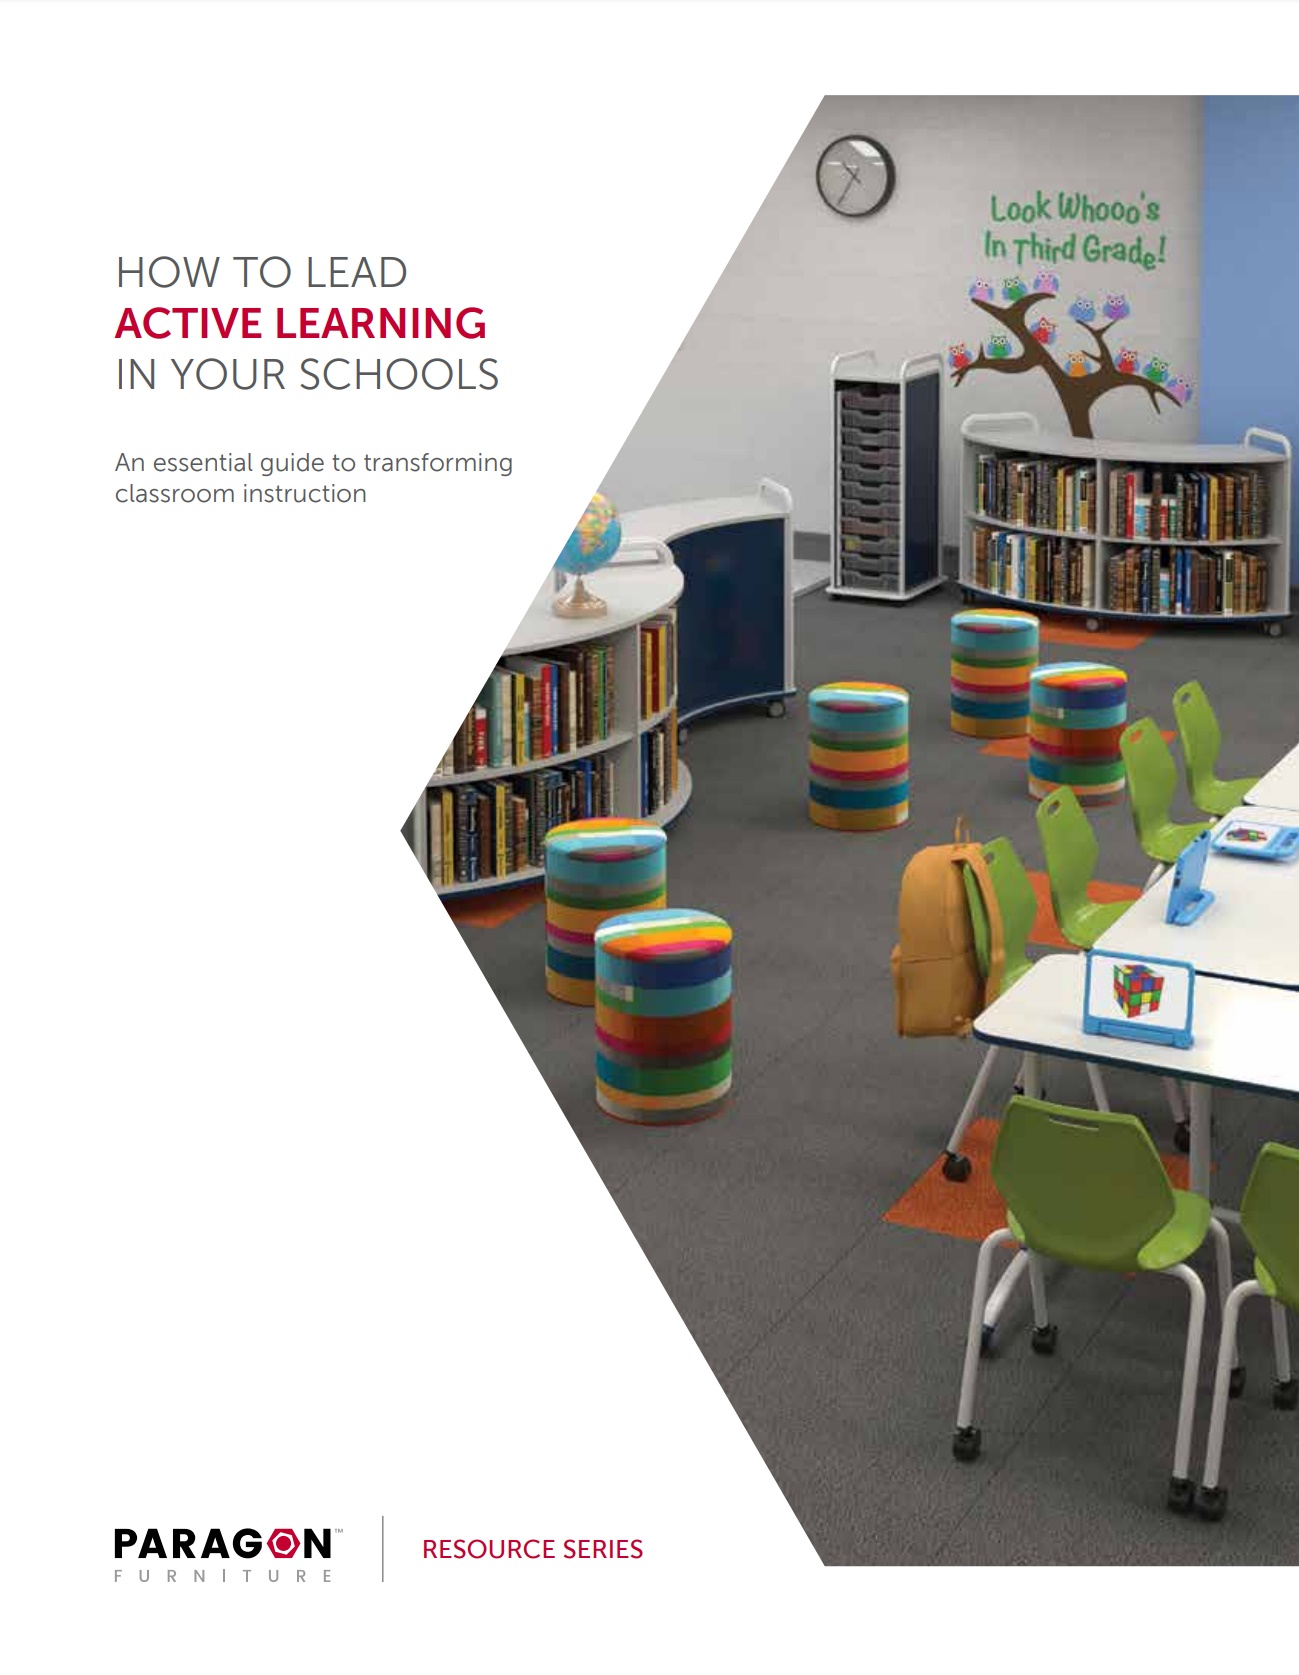 How-To-Lead-Active-Learning-In-Schools-Paragon-Furniture